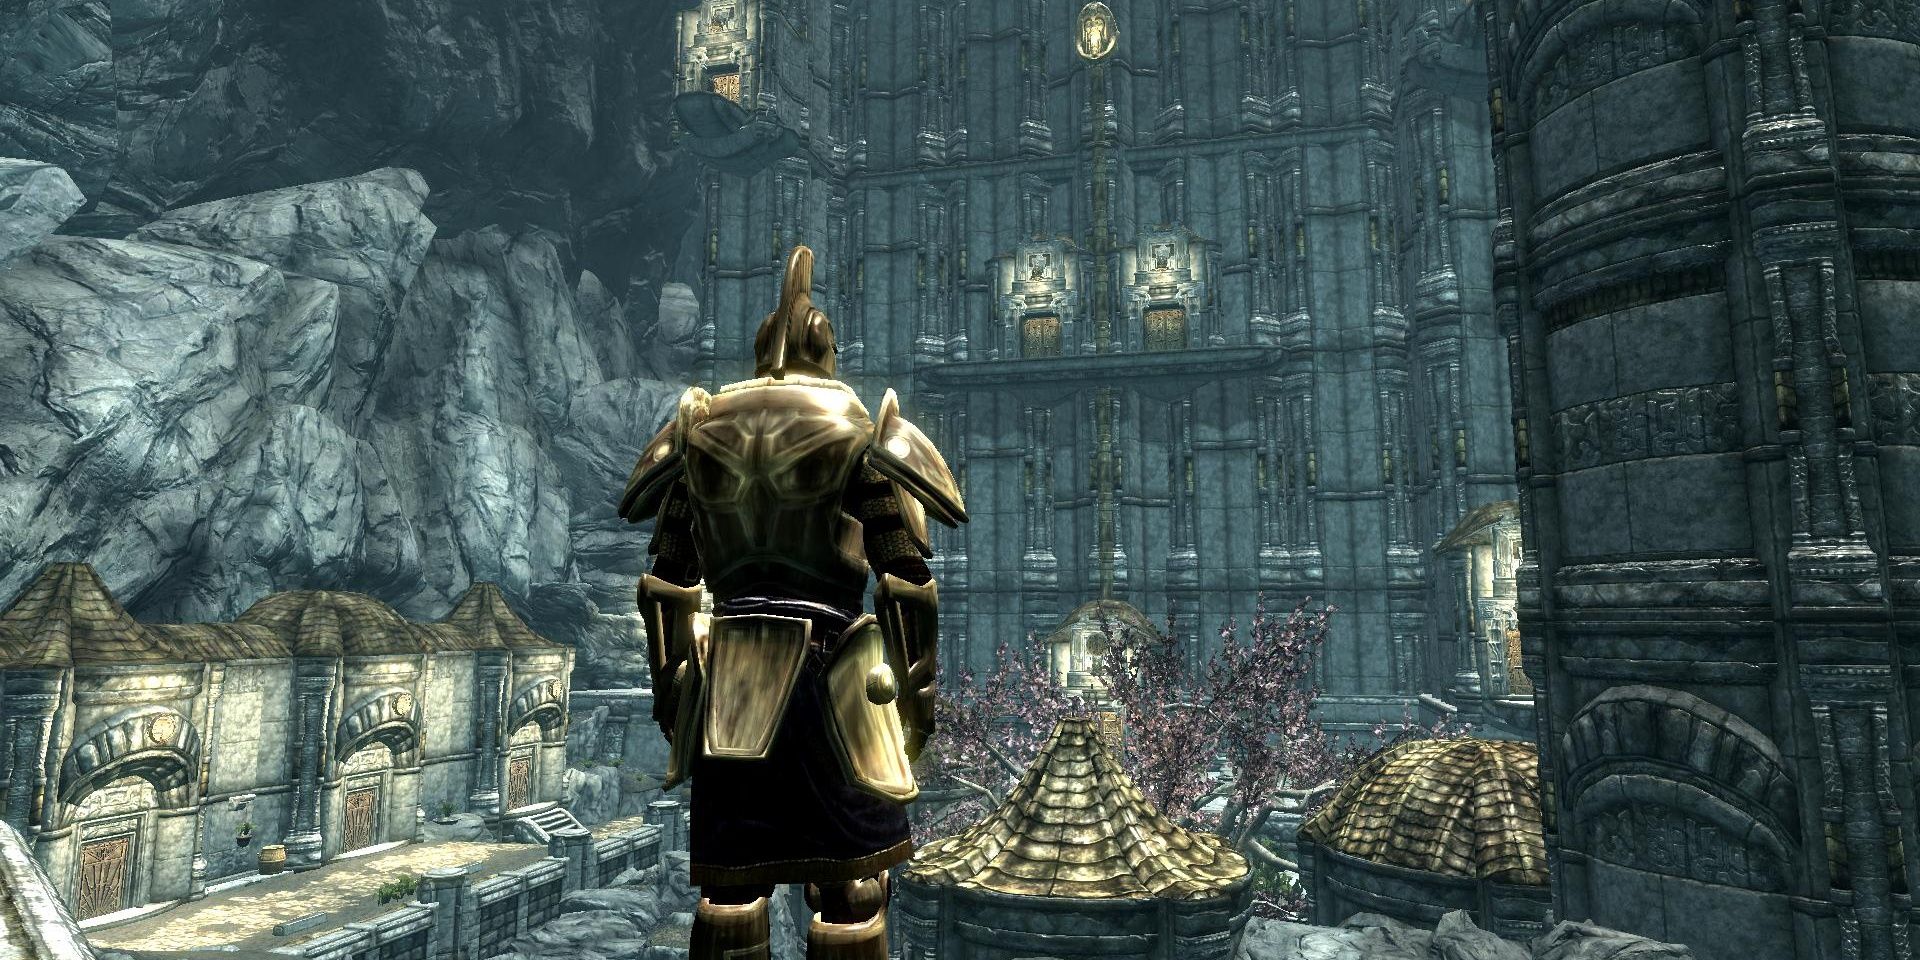 Dragonborn Standing In Outer Area Of Forgotten City